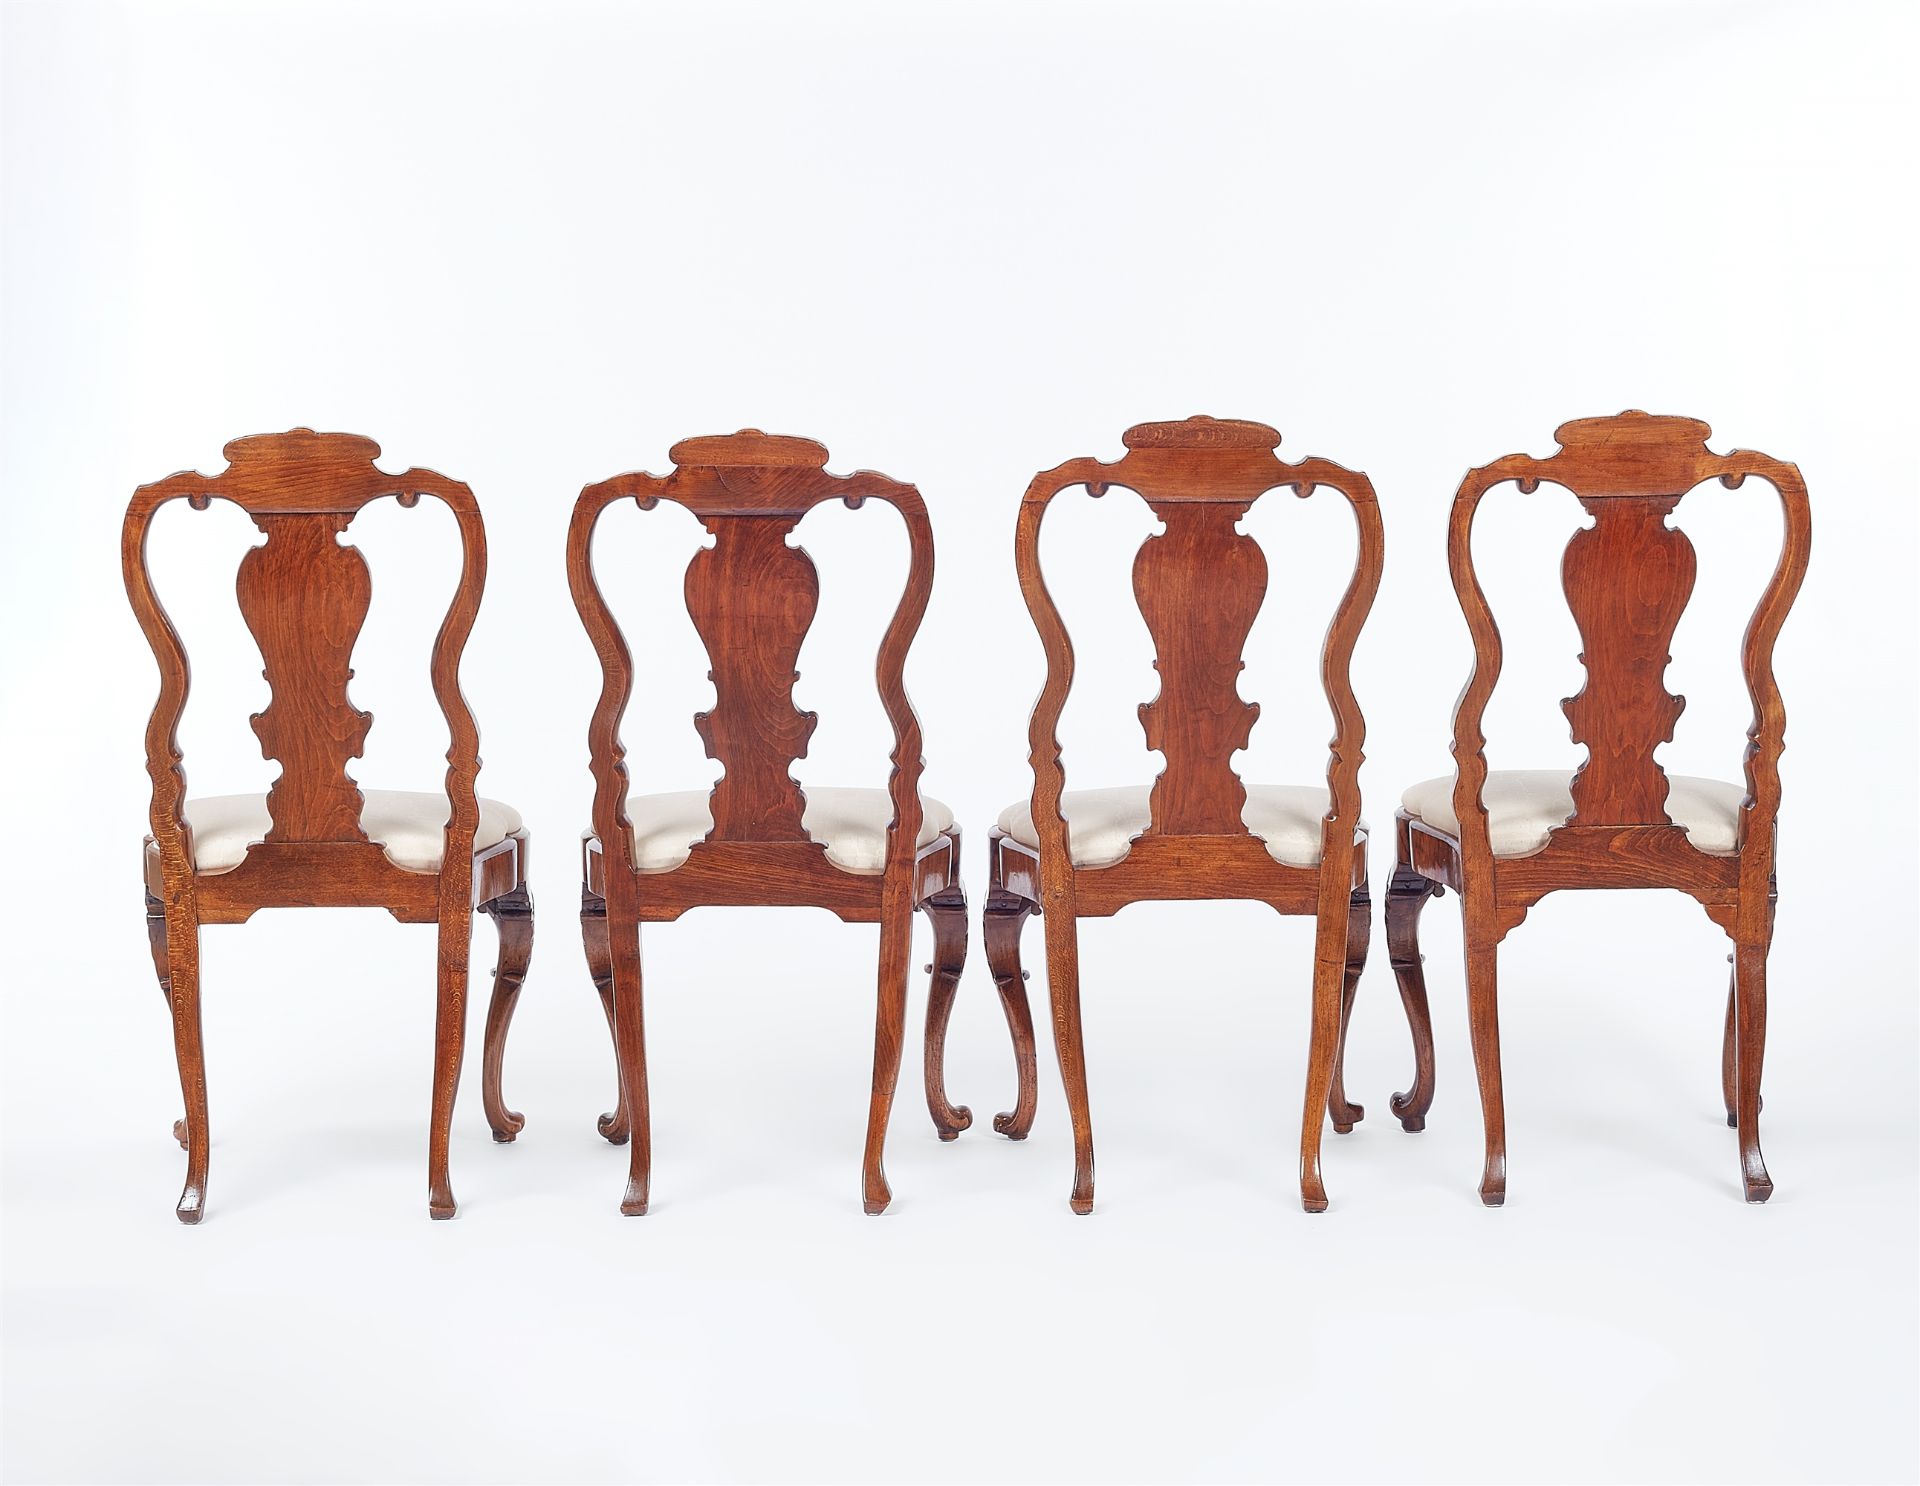 Four chairs by Abraham Roentgen - Image 3 of 6